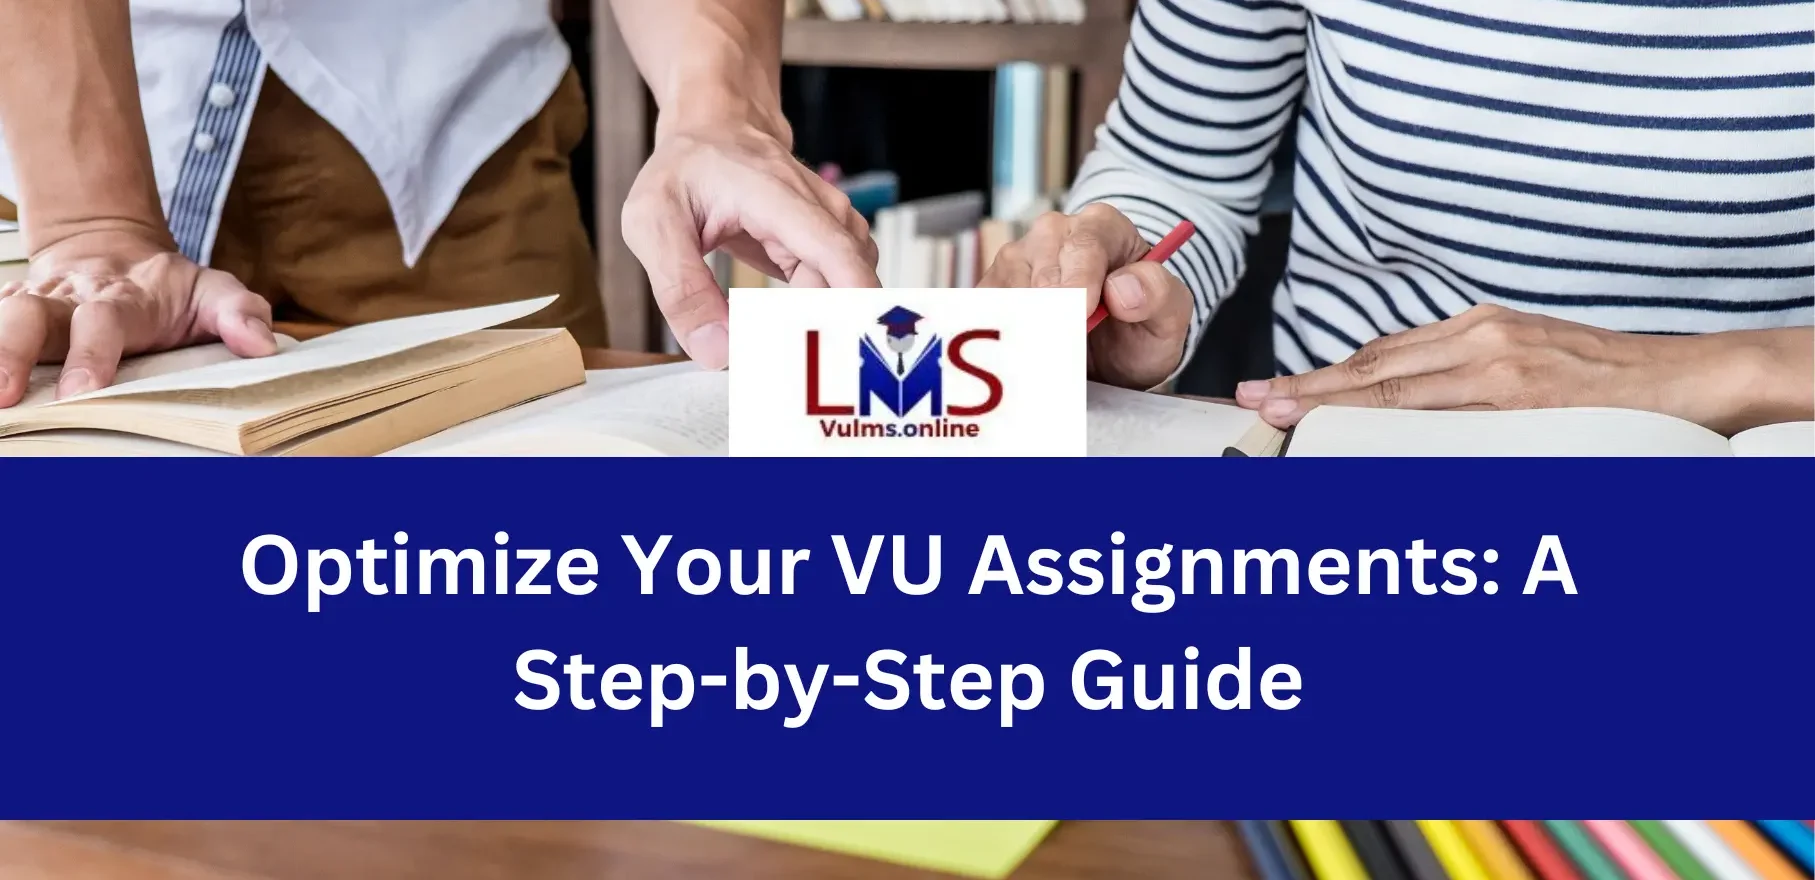 Optimize Your VU Assignments A Step-by-Step Guide